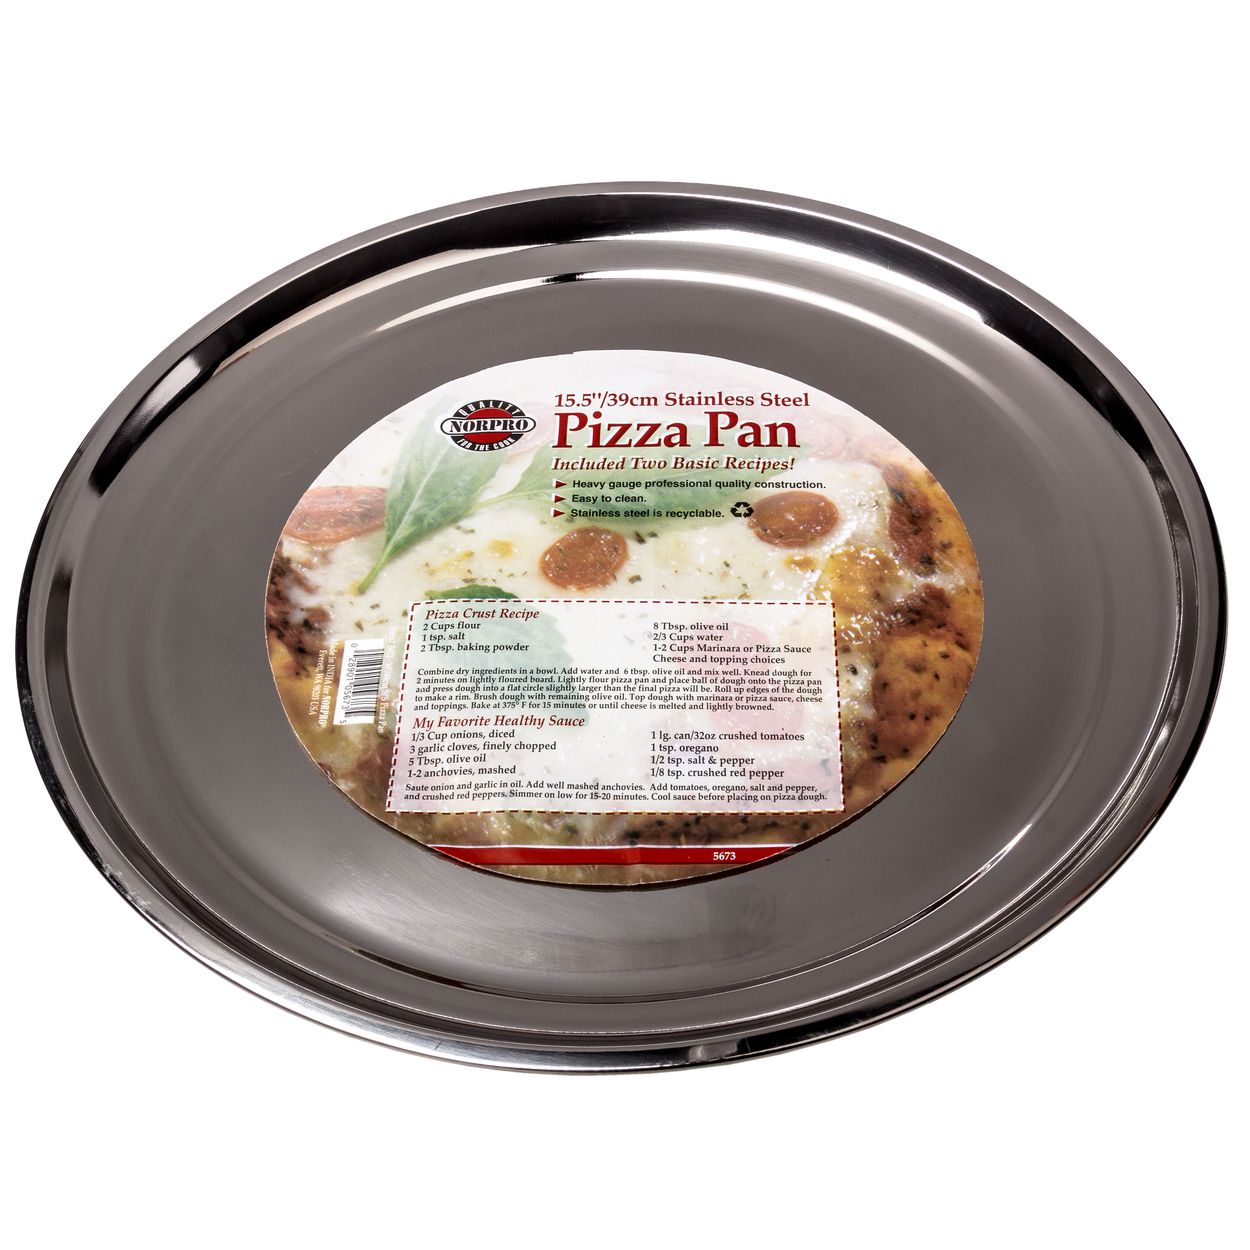 TeamFar Pizza Pan 10 inch Pizza Pans Pizza Tray Stainless Steel for Oven Baking 2 Pack Non Toxic & Healthy Heavy Duty & Dishwasher Safe 